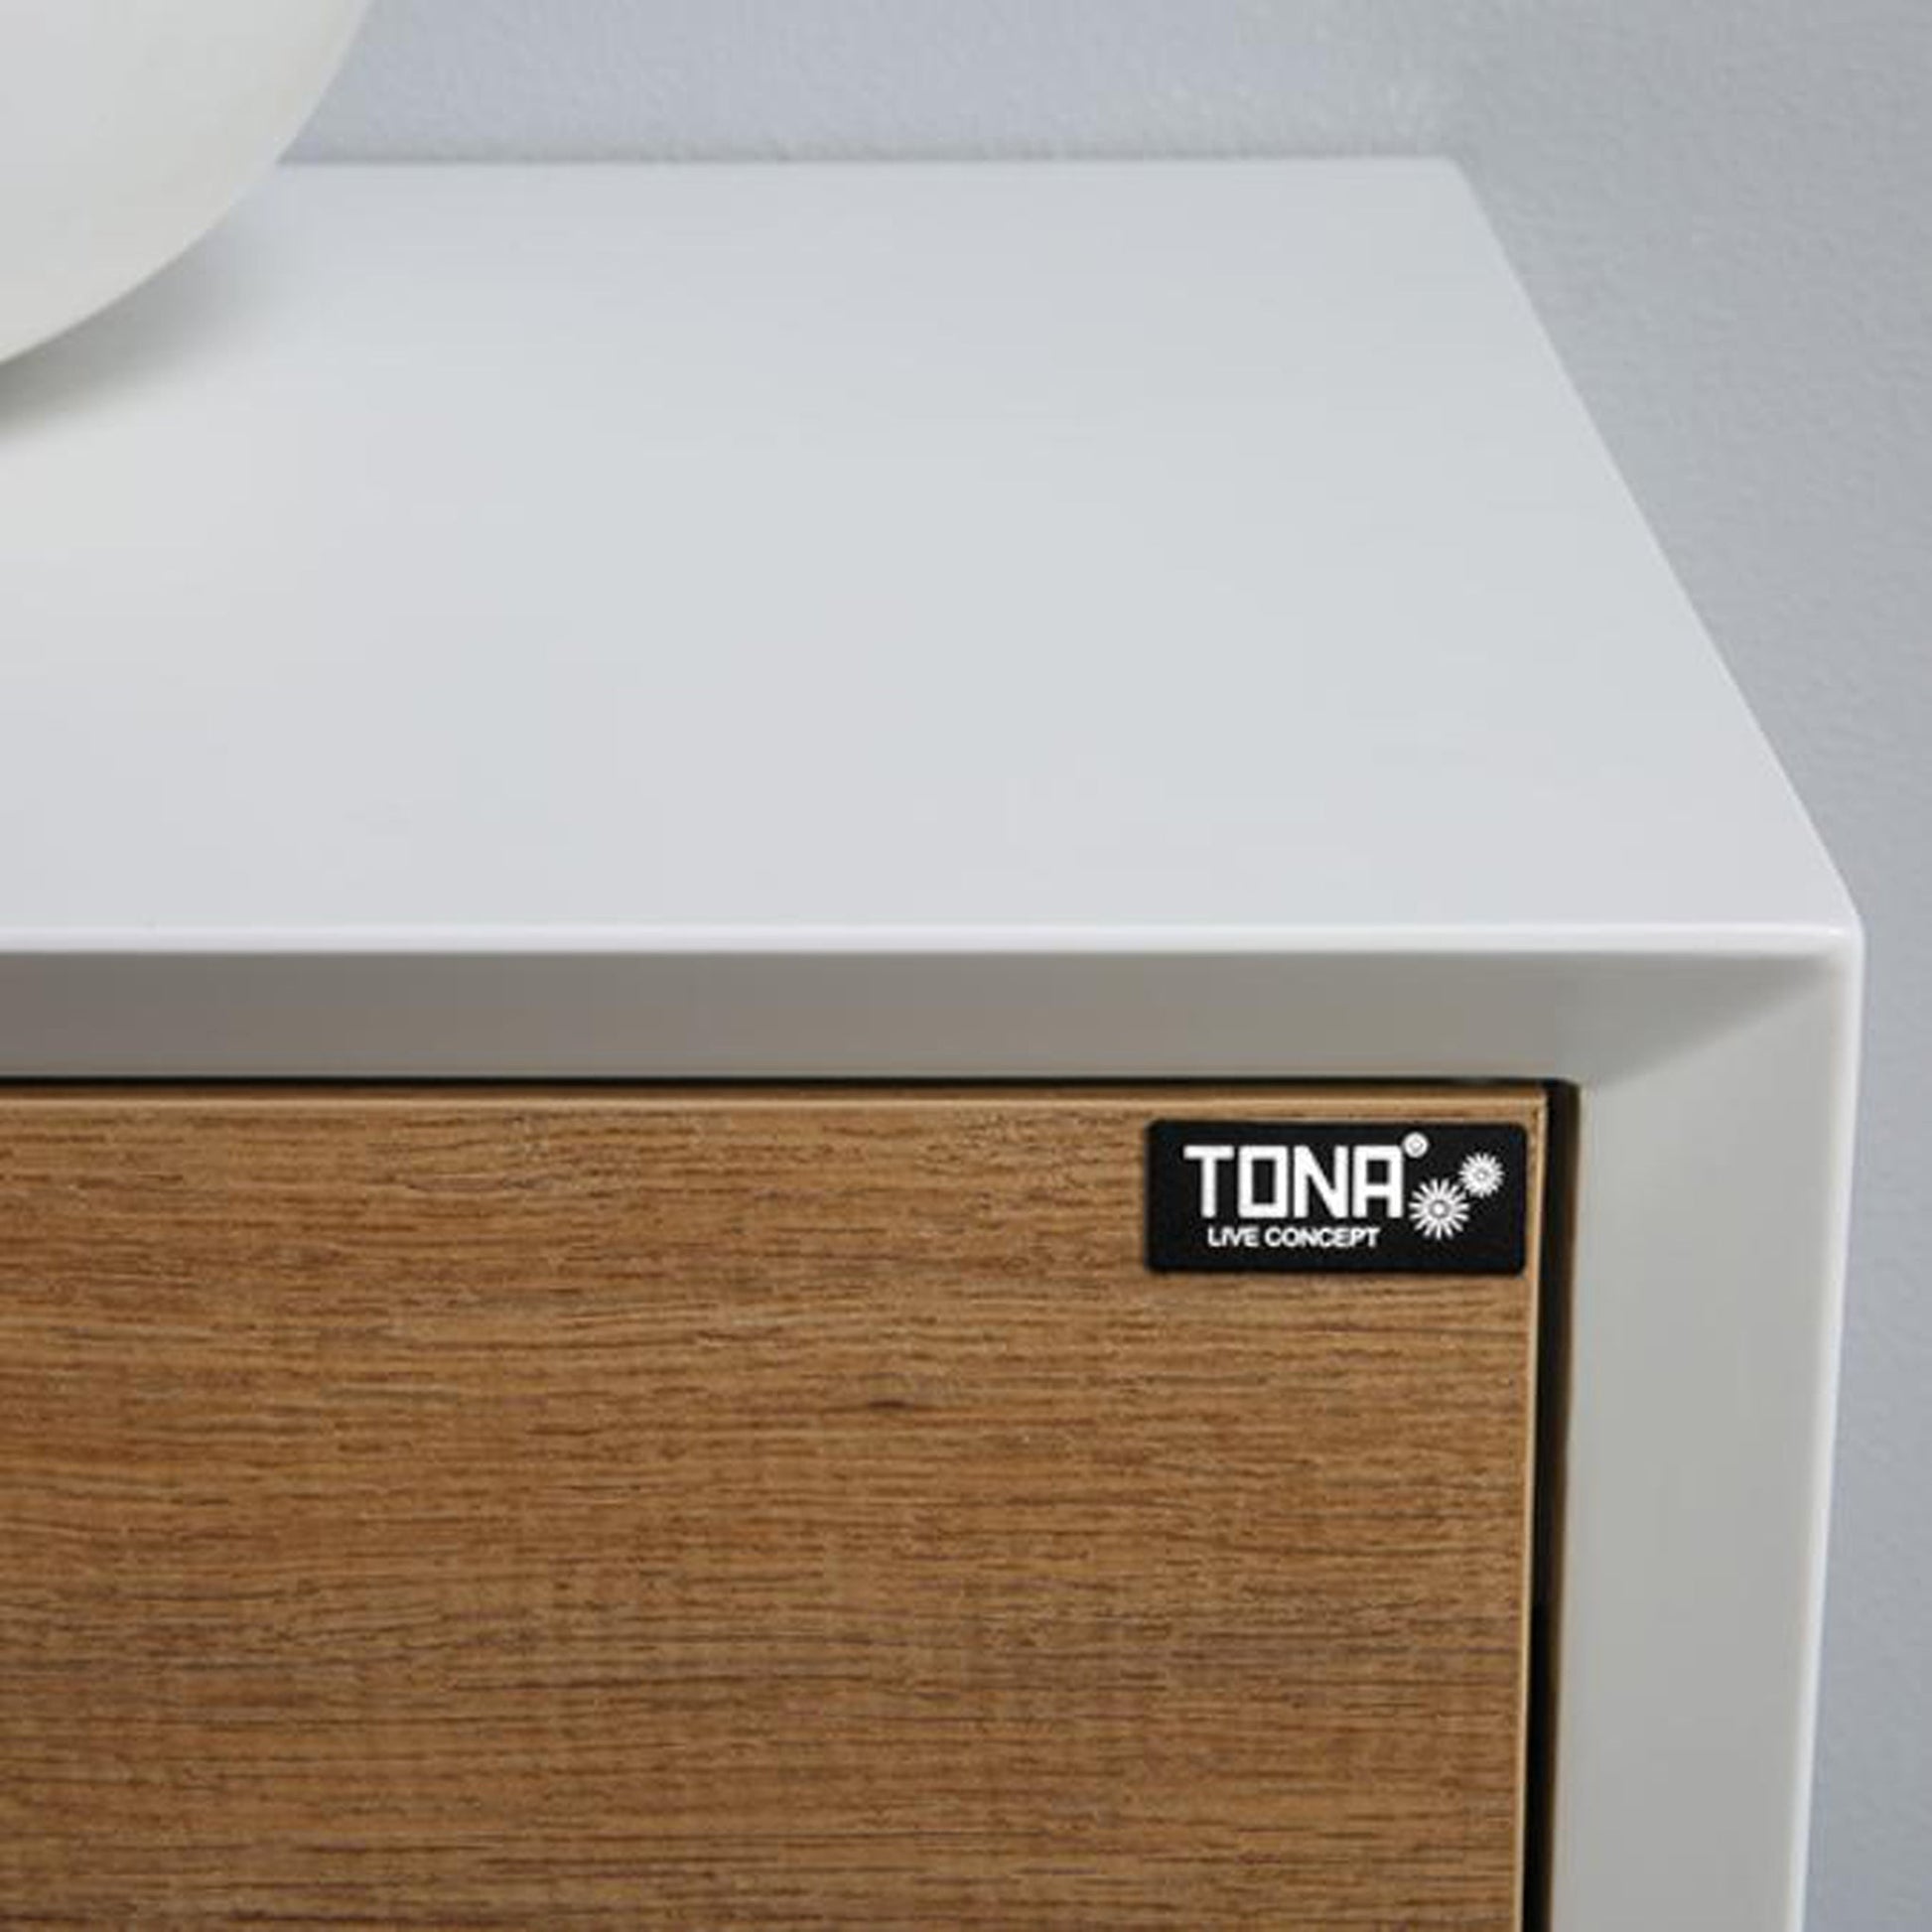 TONA Fiona 48" White Oak Grain & Matte White Wall-Mounted Bathroom Vanity Set With Lacquered MDF Countertop and Single Vessel Sink